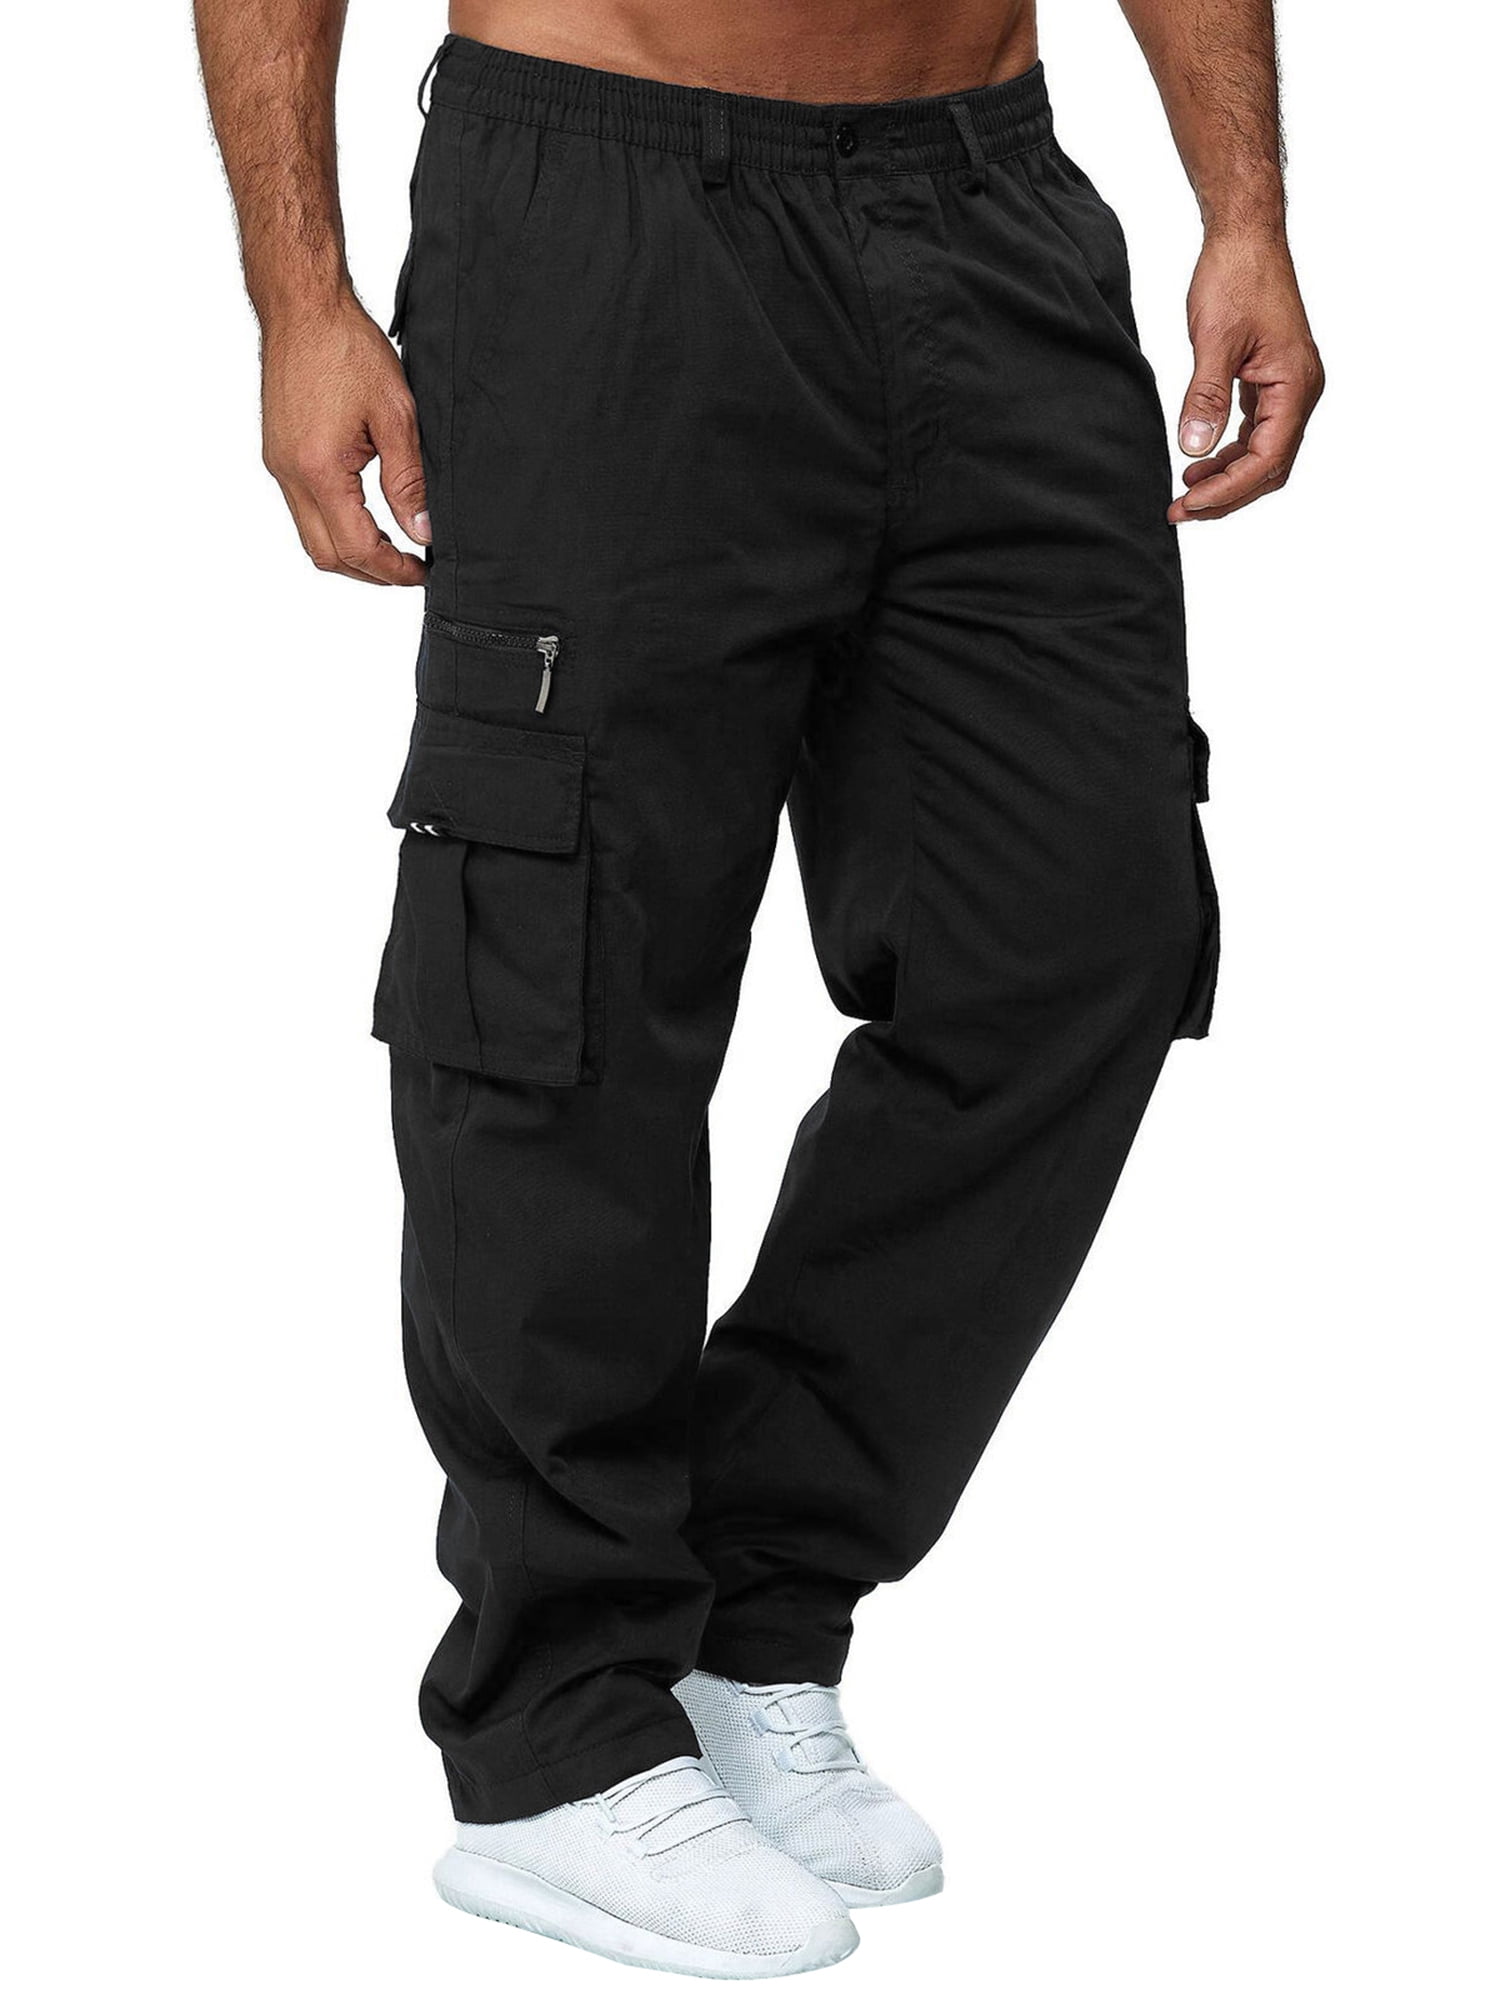 wybzd Men Casual Loose Straight Cargo Pants Elastic Waist Relaxed Fit  Straight Leg Trousers with Pockets Black XXXL